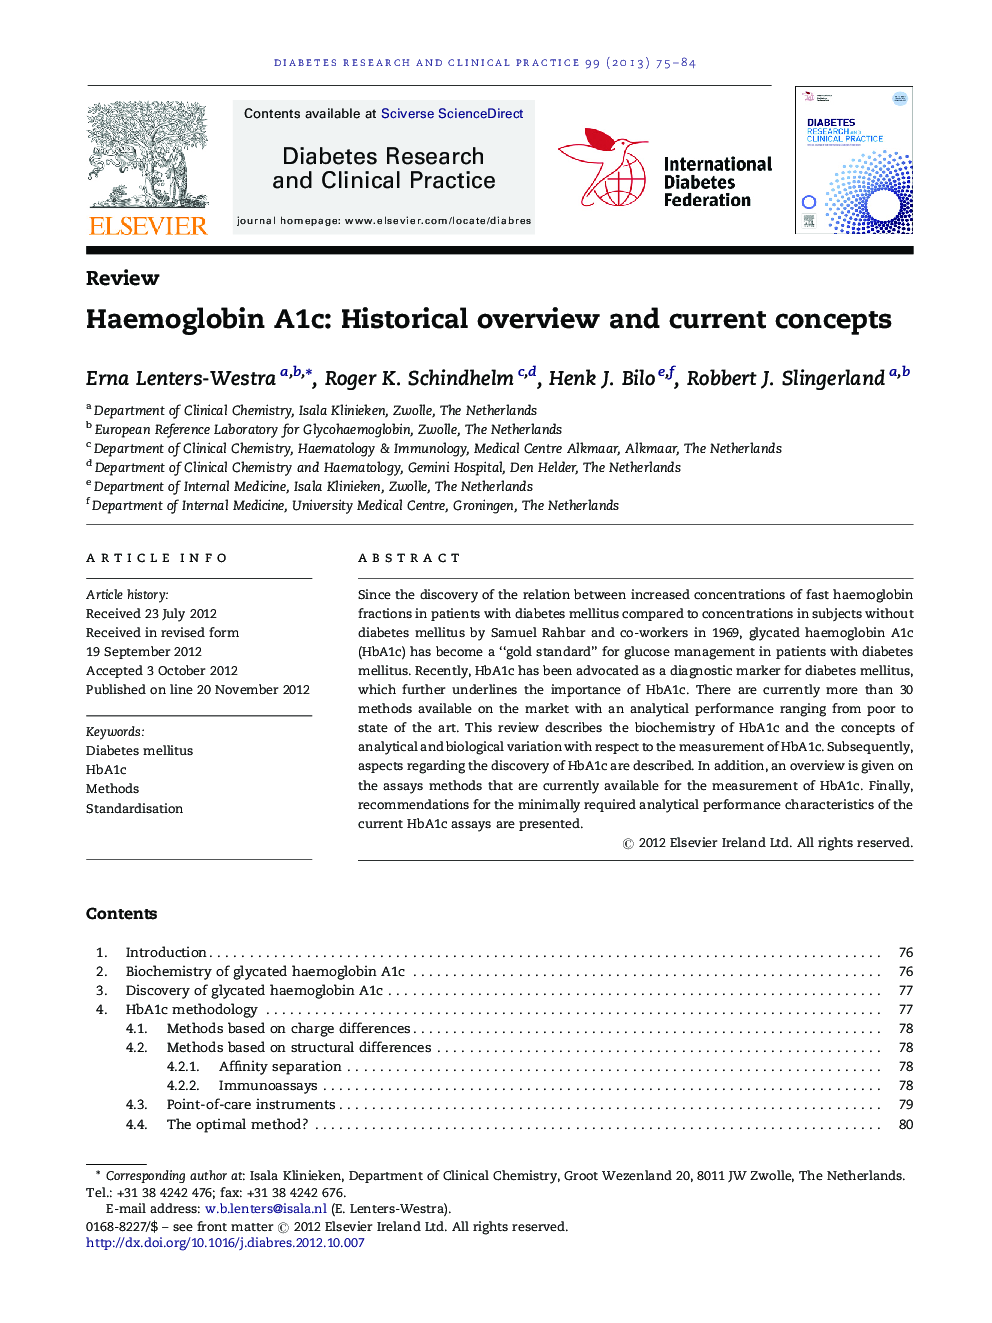 Haemoglobin A1c: Historical overview and current concepts